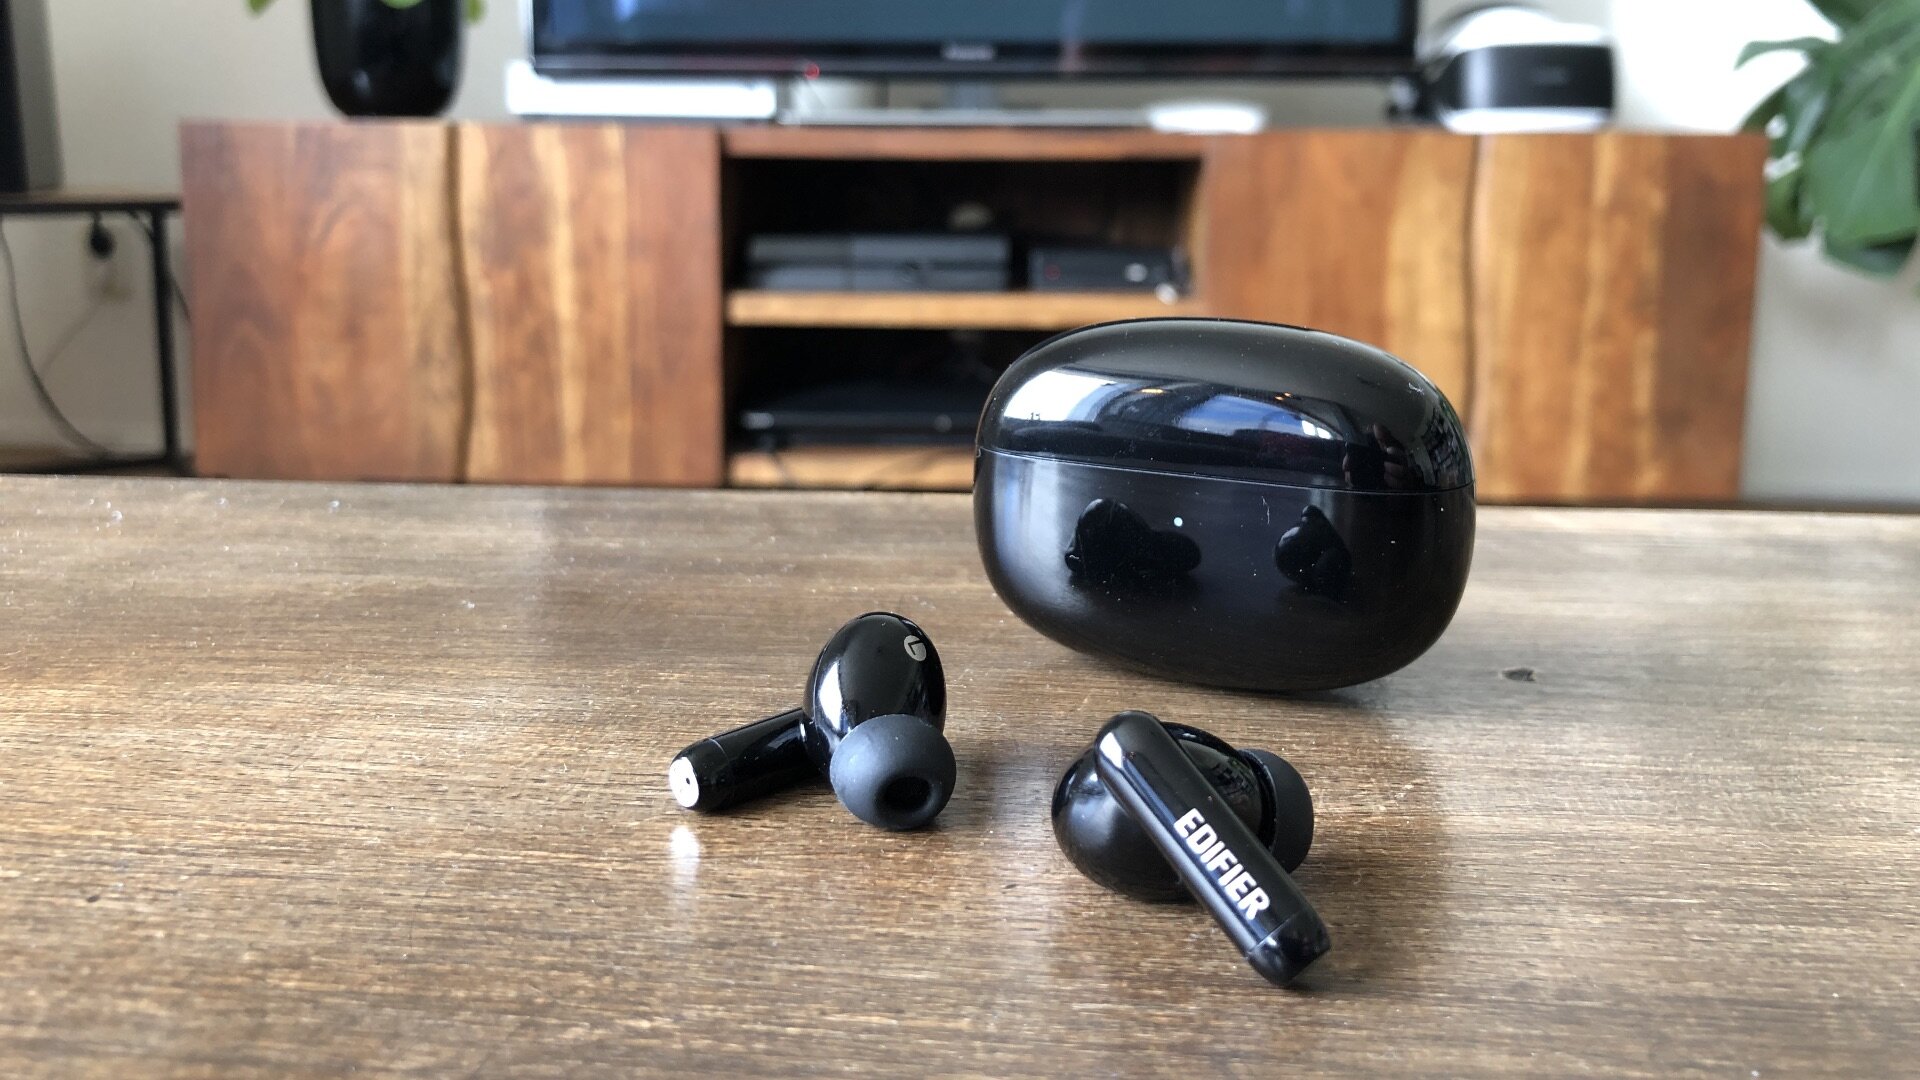 Edifier TWS330NB review: ANC earbuds with great call quality